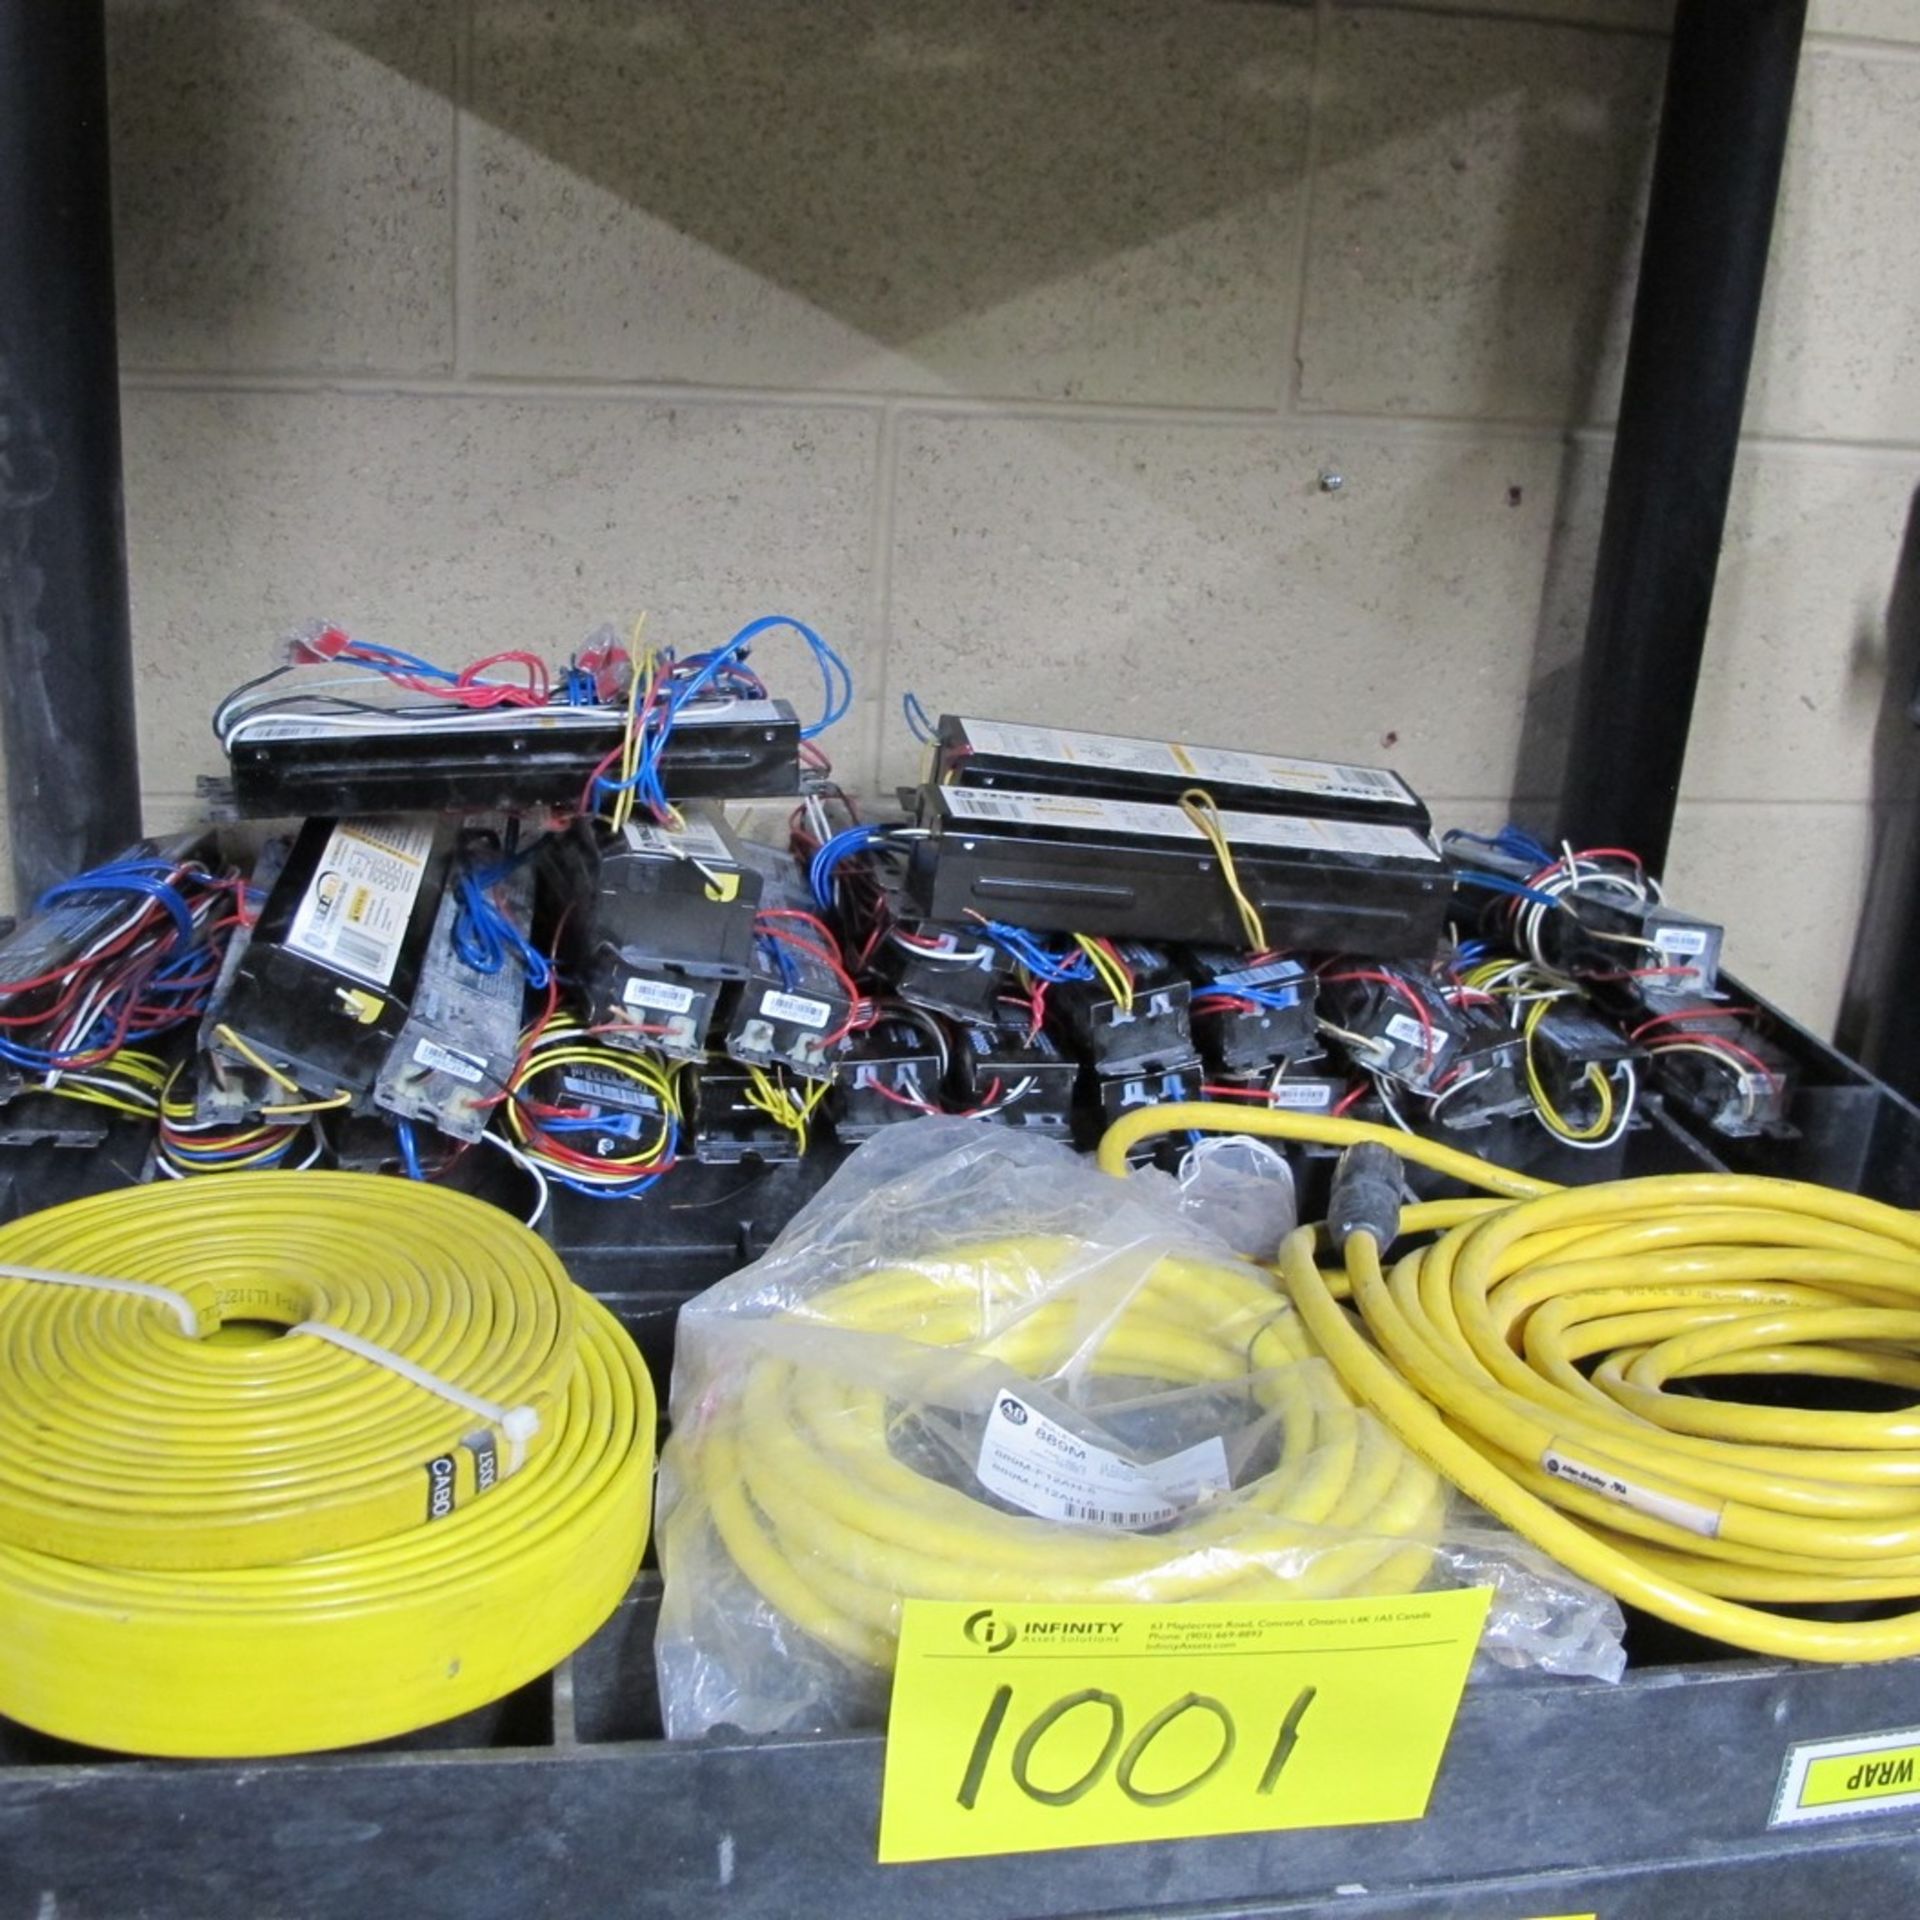 LOT OF BALLASTS, CABLES, MIXED PARTS, ETC. (NORTH ELECTRICAL ROOM)